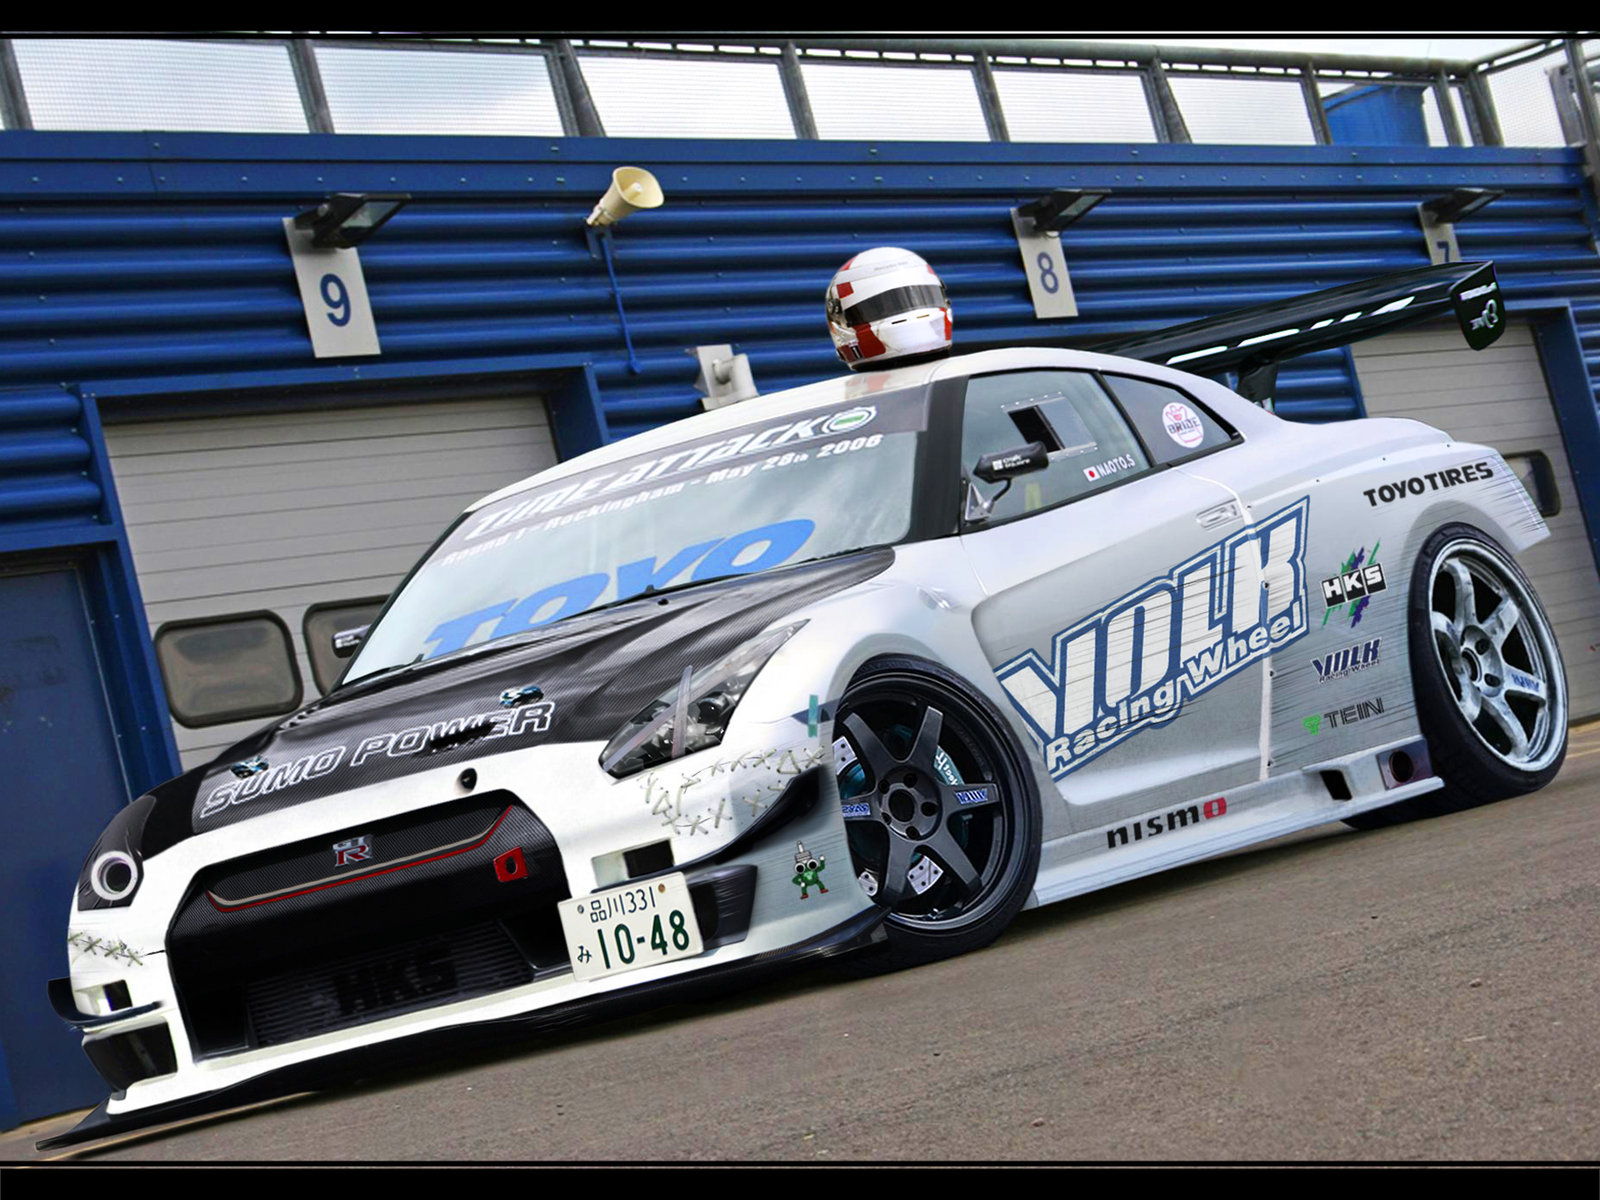 Nissan Skyline R35 Gtr Pictures To Pin